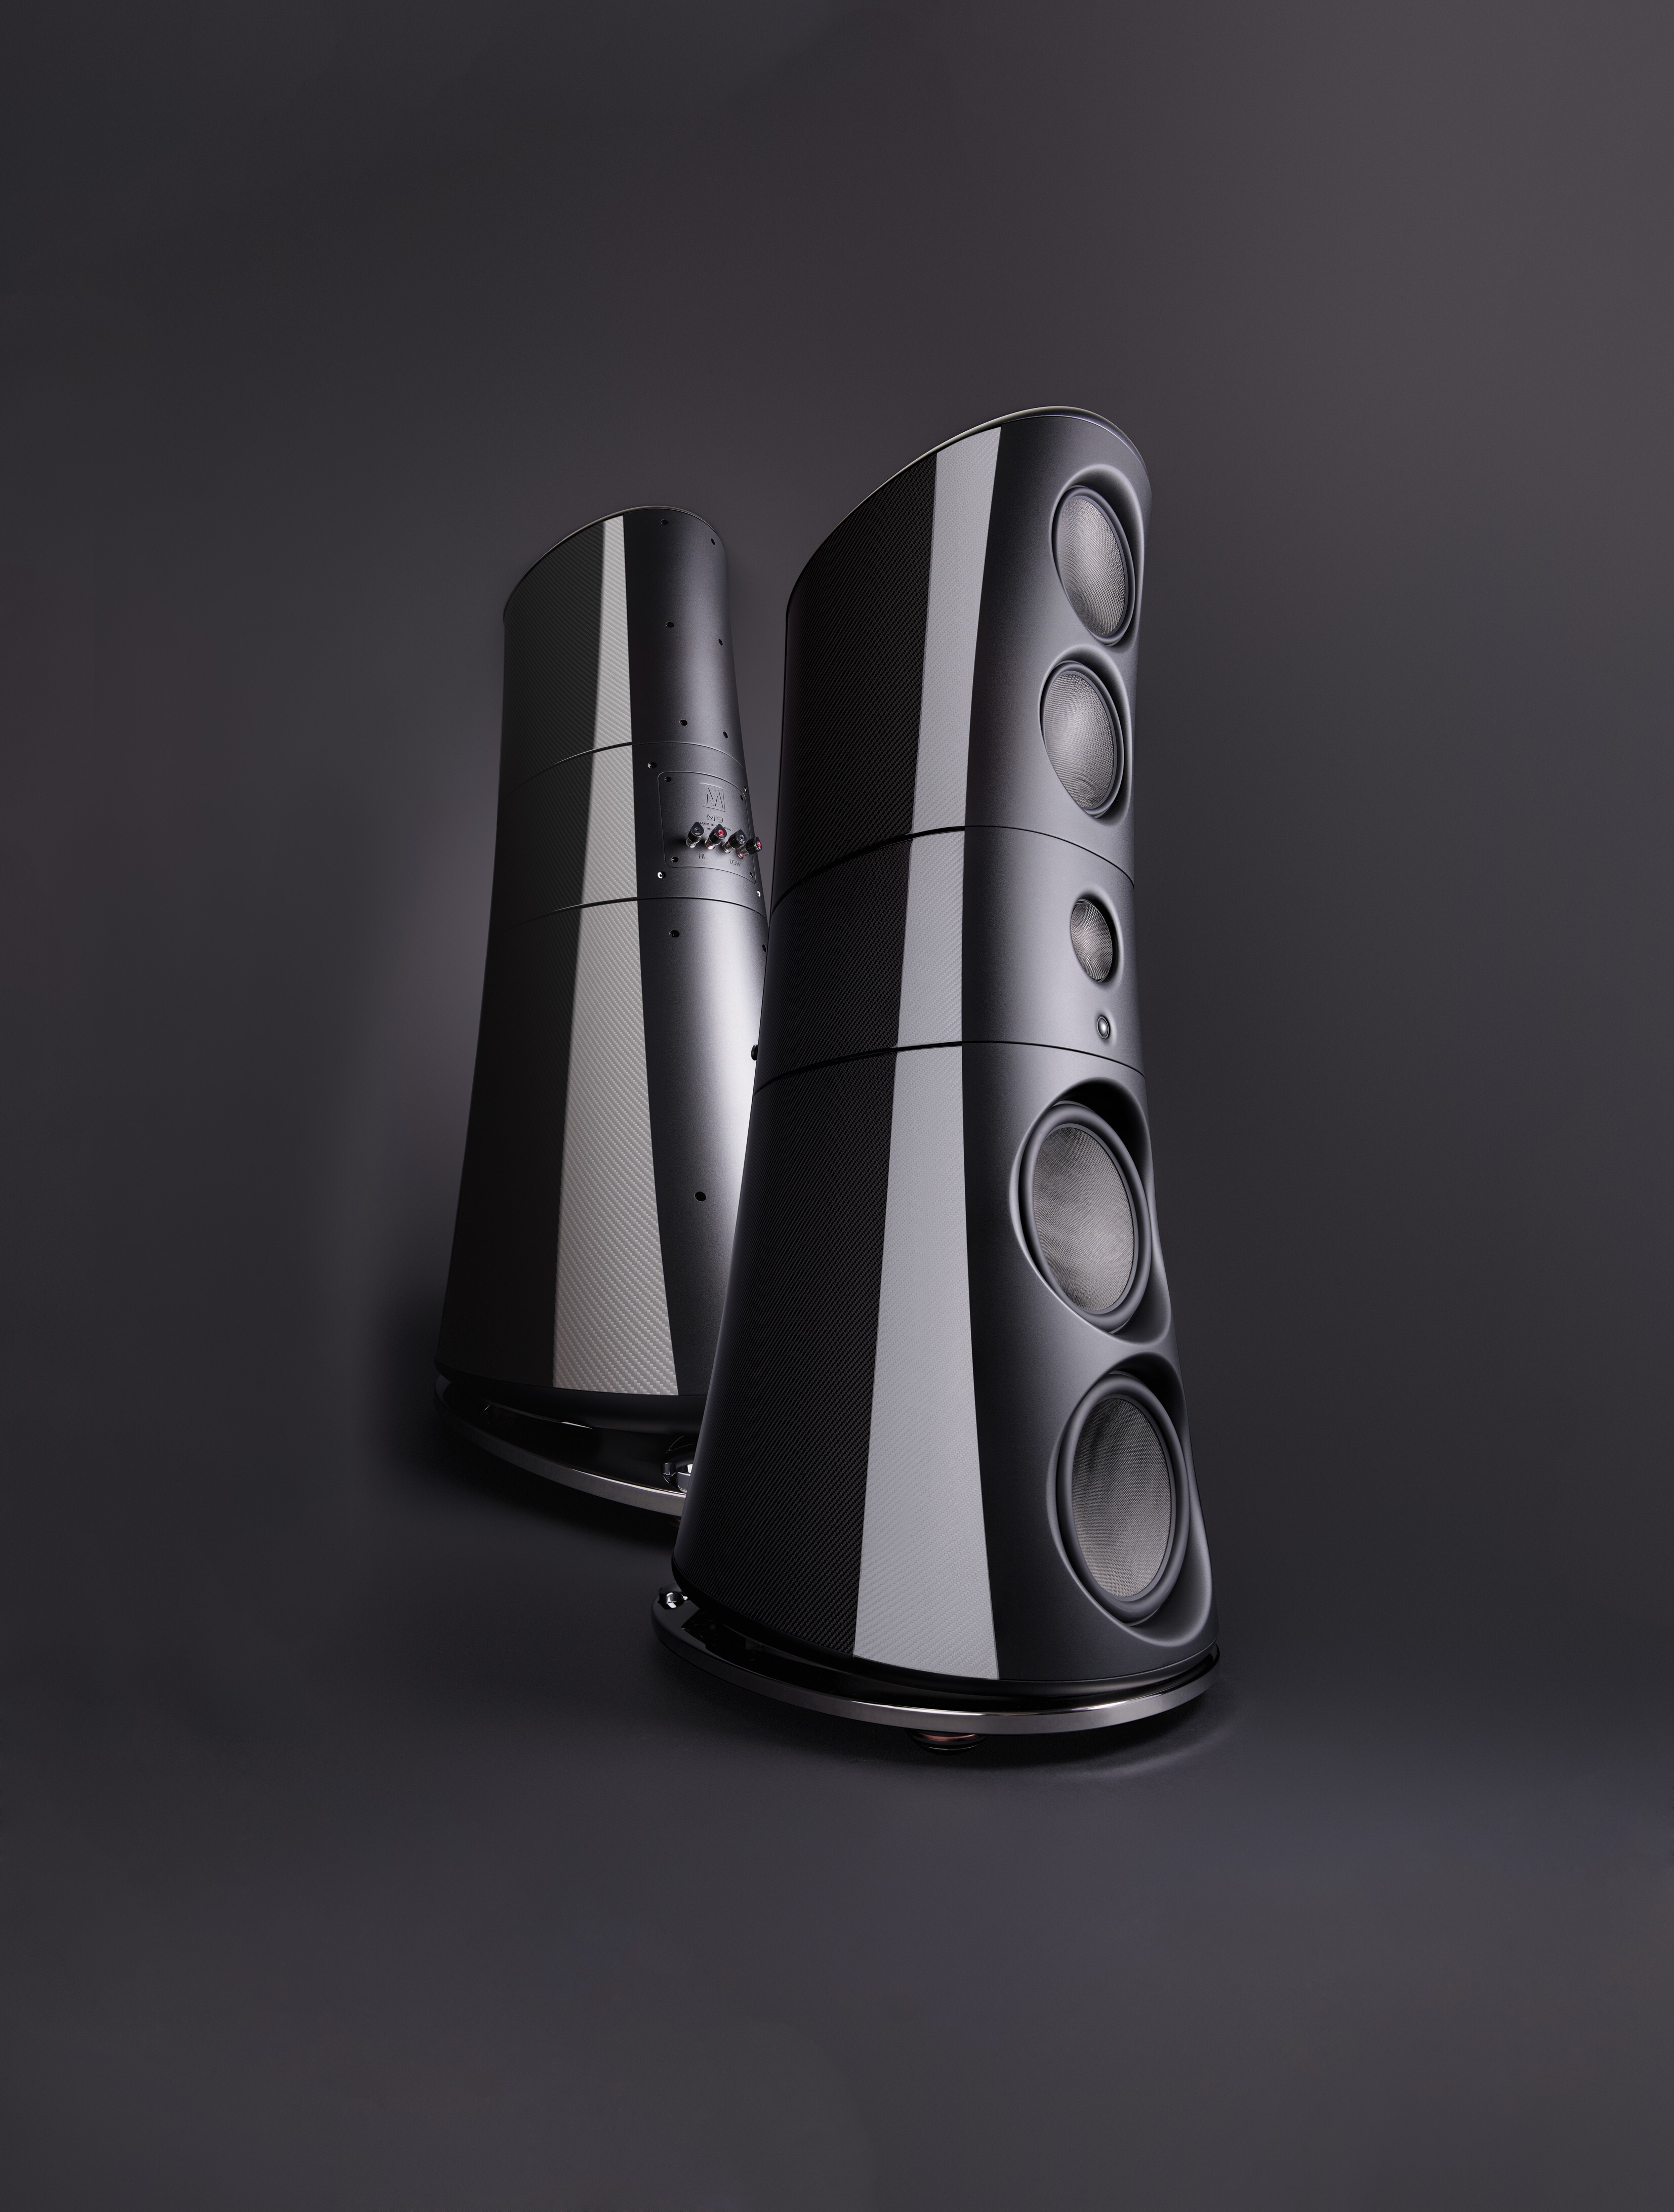 Magico’s sleek new M9 loudspeakers are enormous but the sound they produce renders them invisible at the same time. Photo: handout